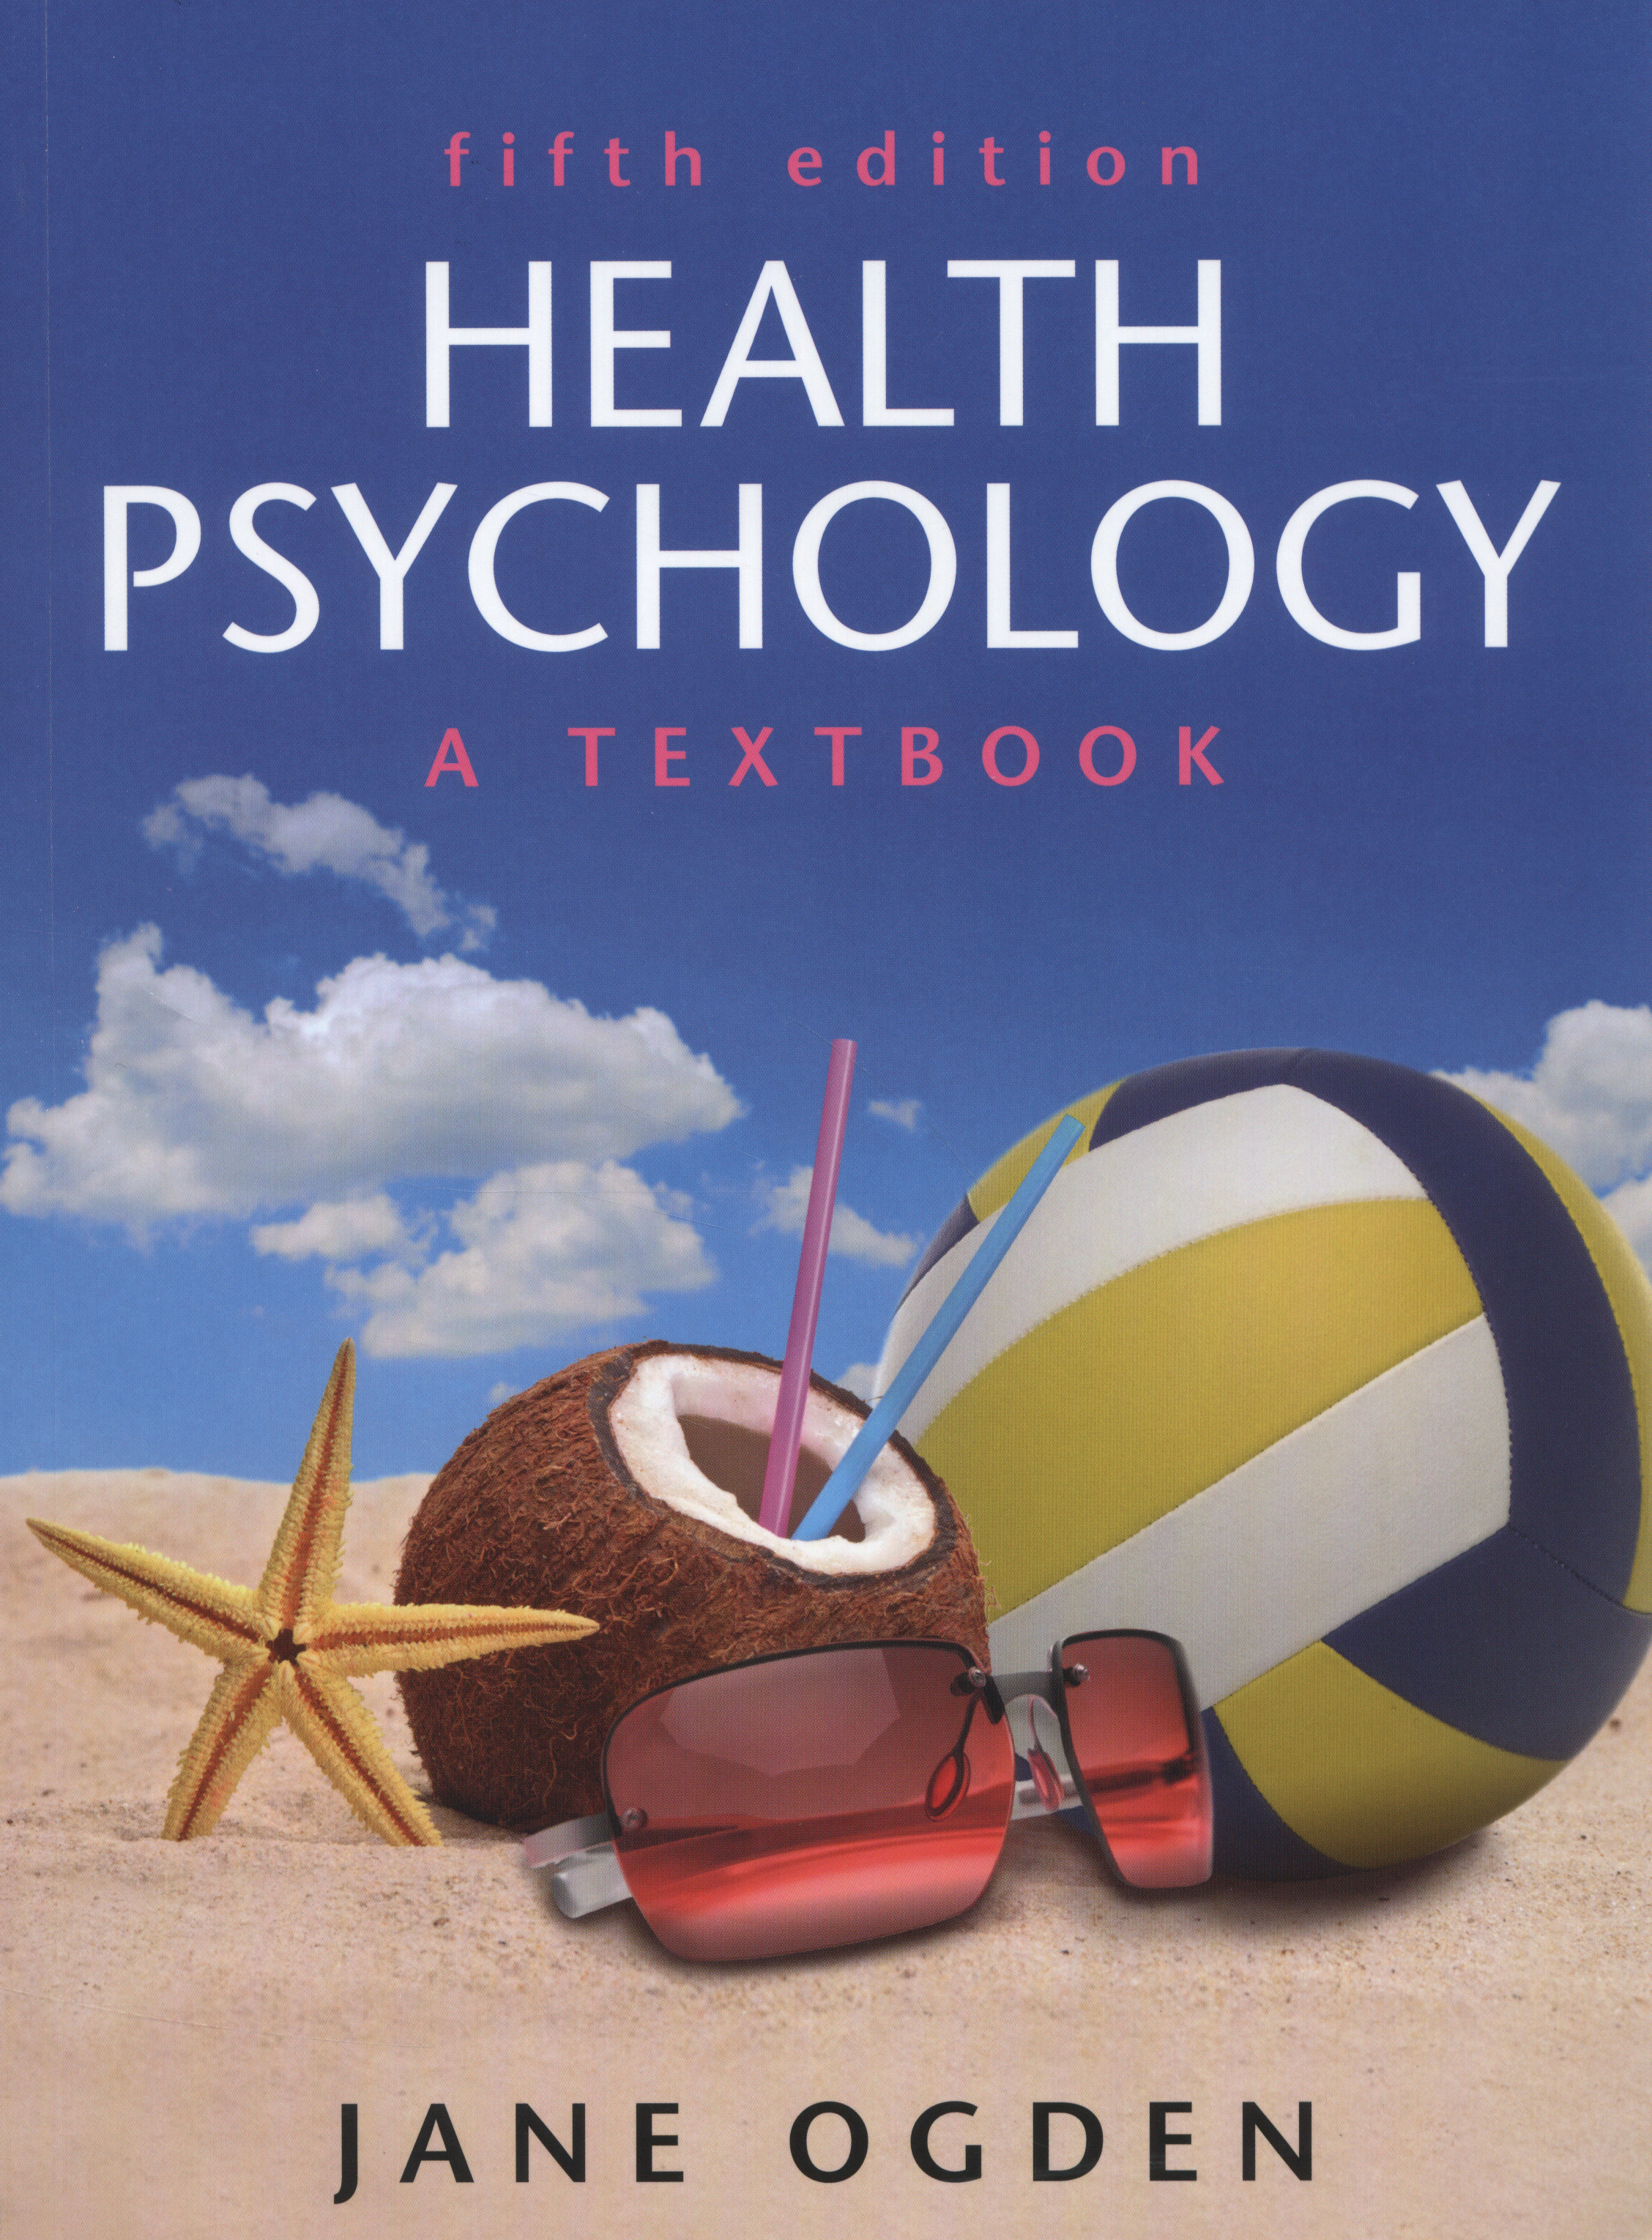 research ideas for health psychology